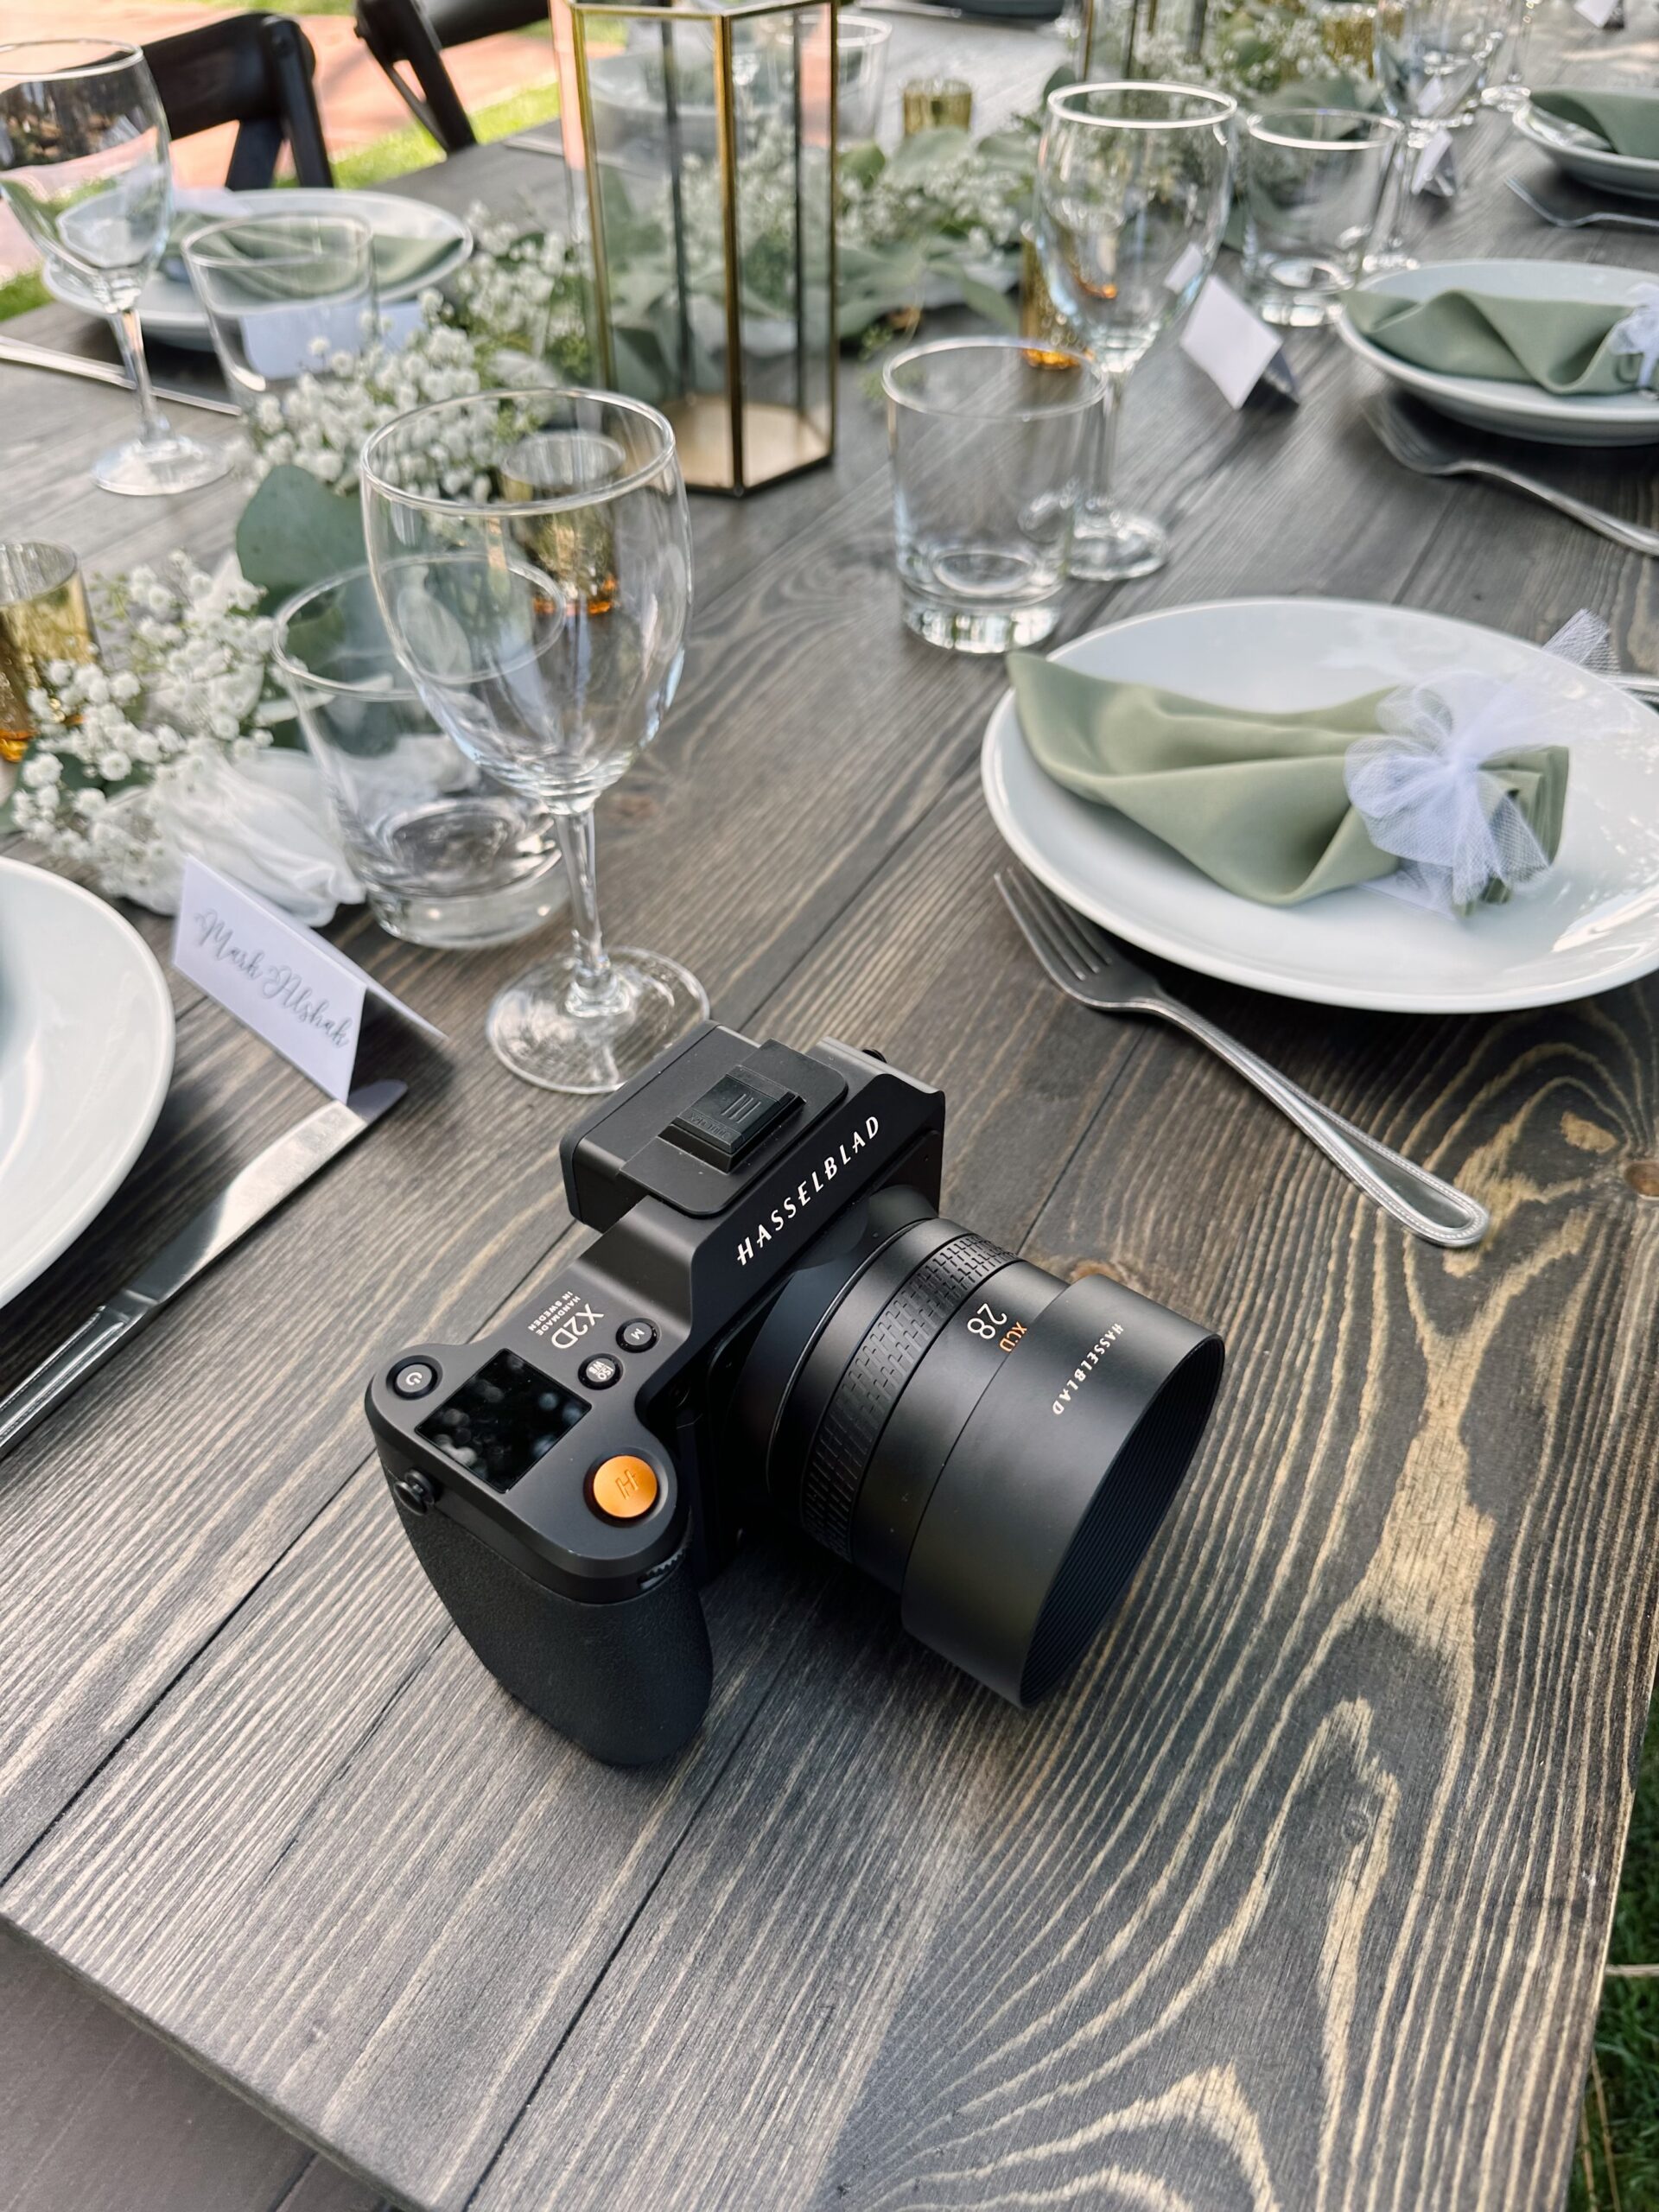 Hasselblad X2D 100C shown on a wooden table alongside an array of place settings, a table runner, white florals, and other decor.